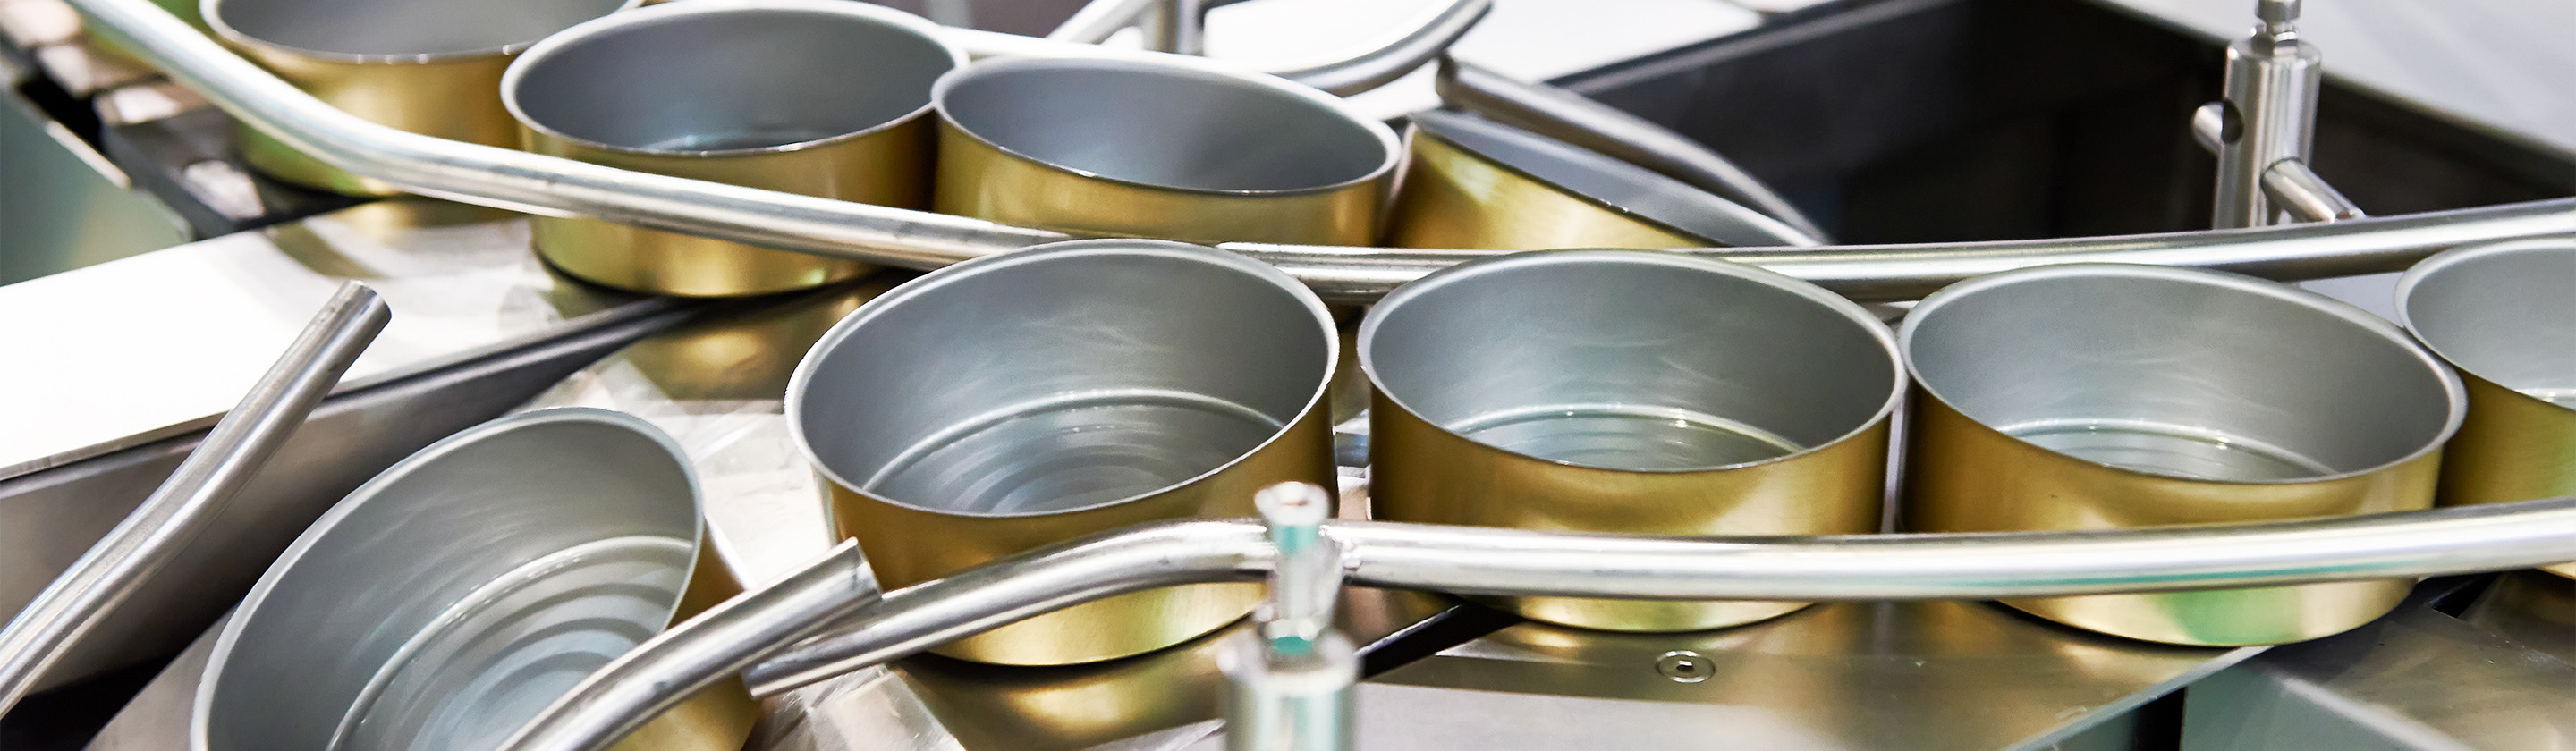 Metals & Alloys in Food Contact Applications